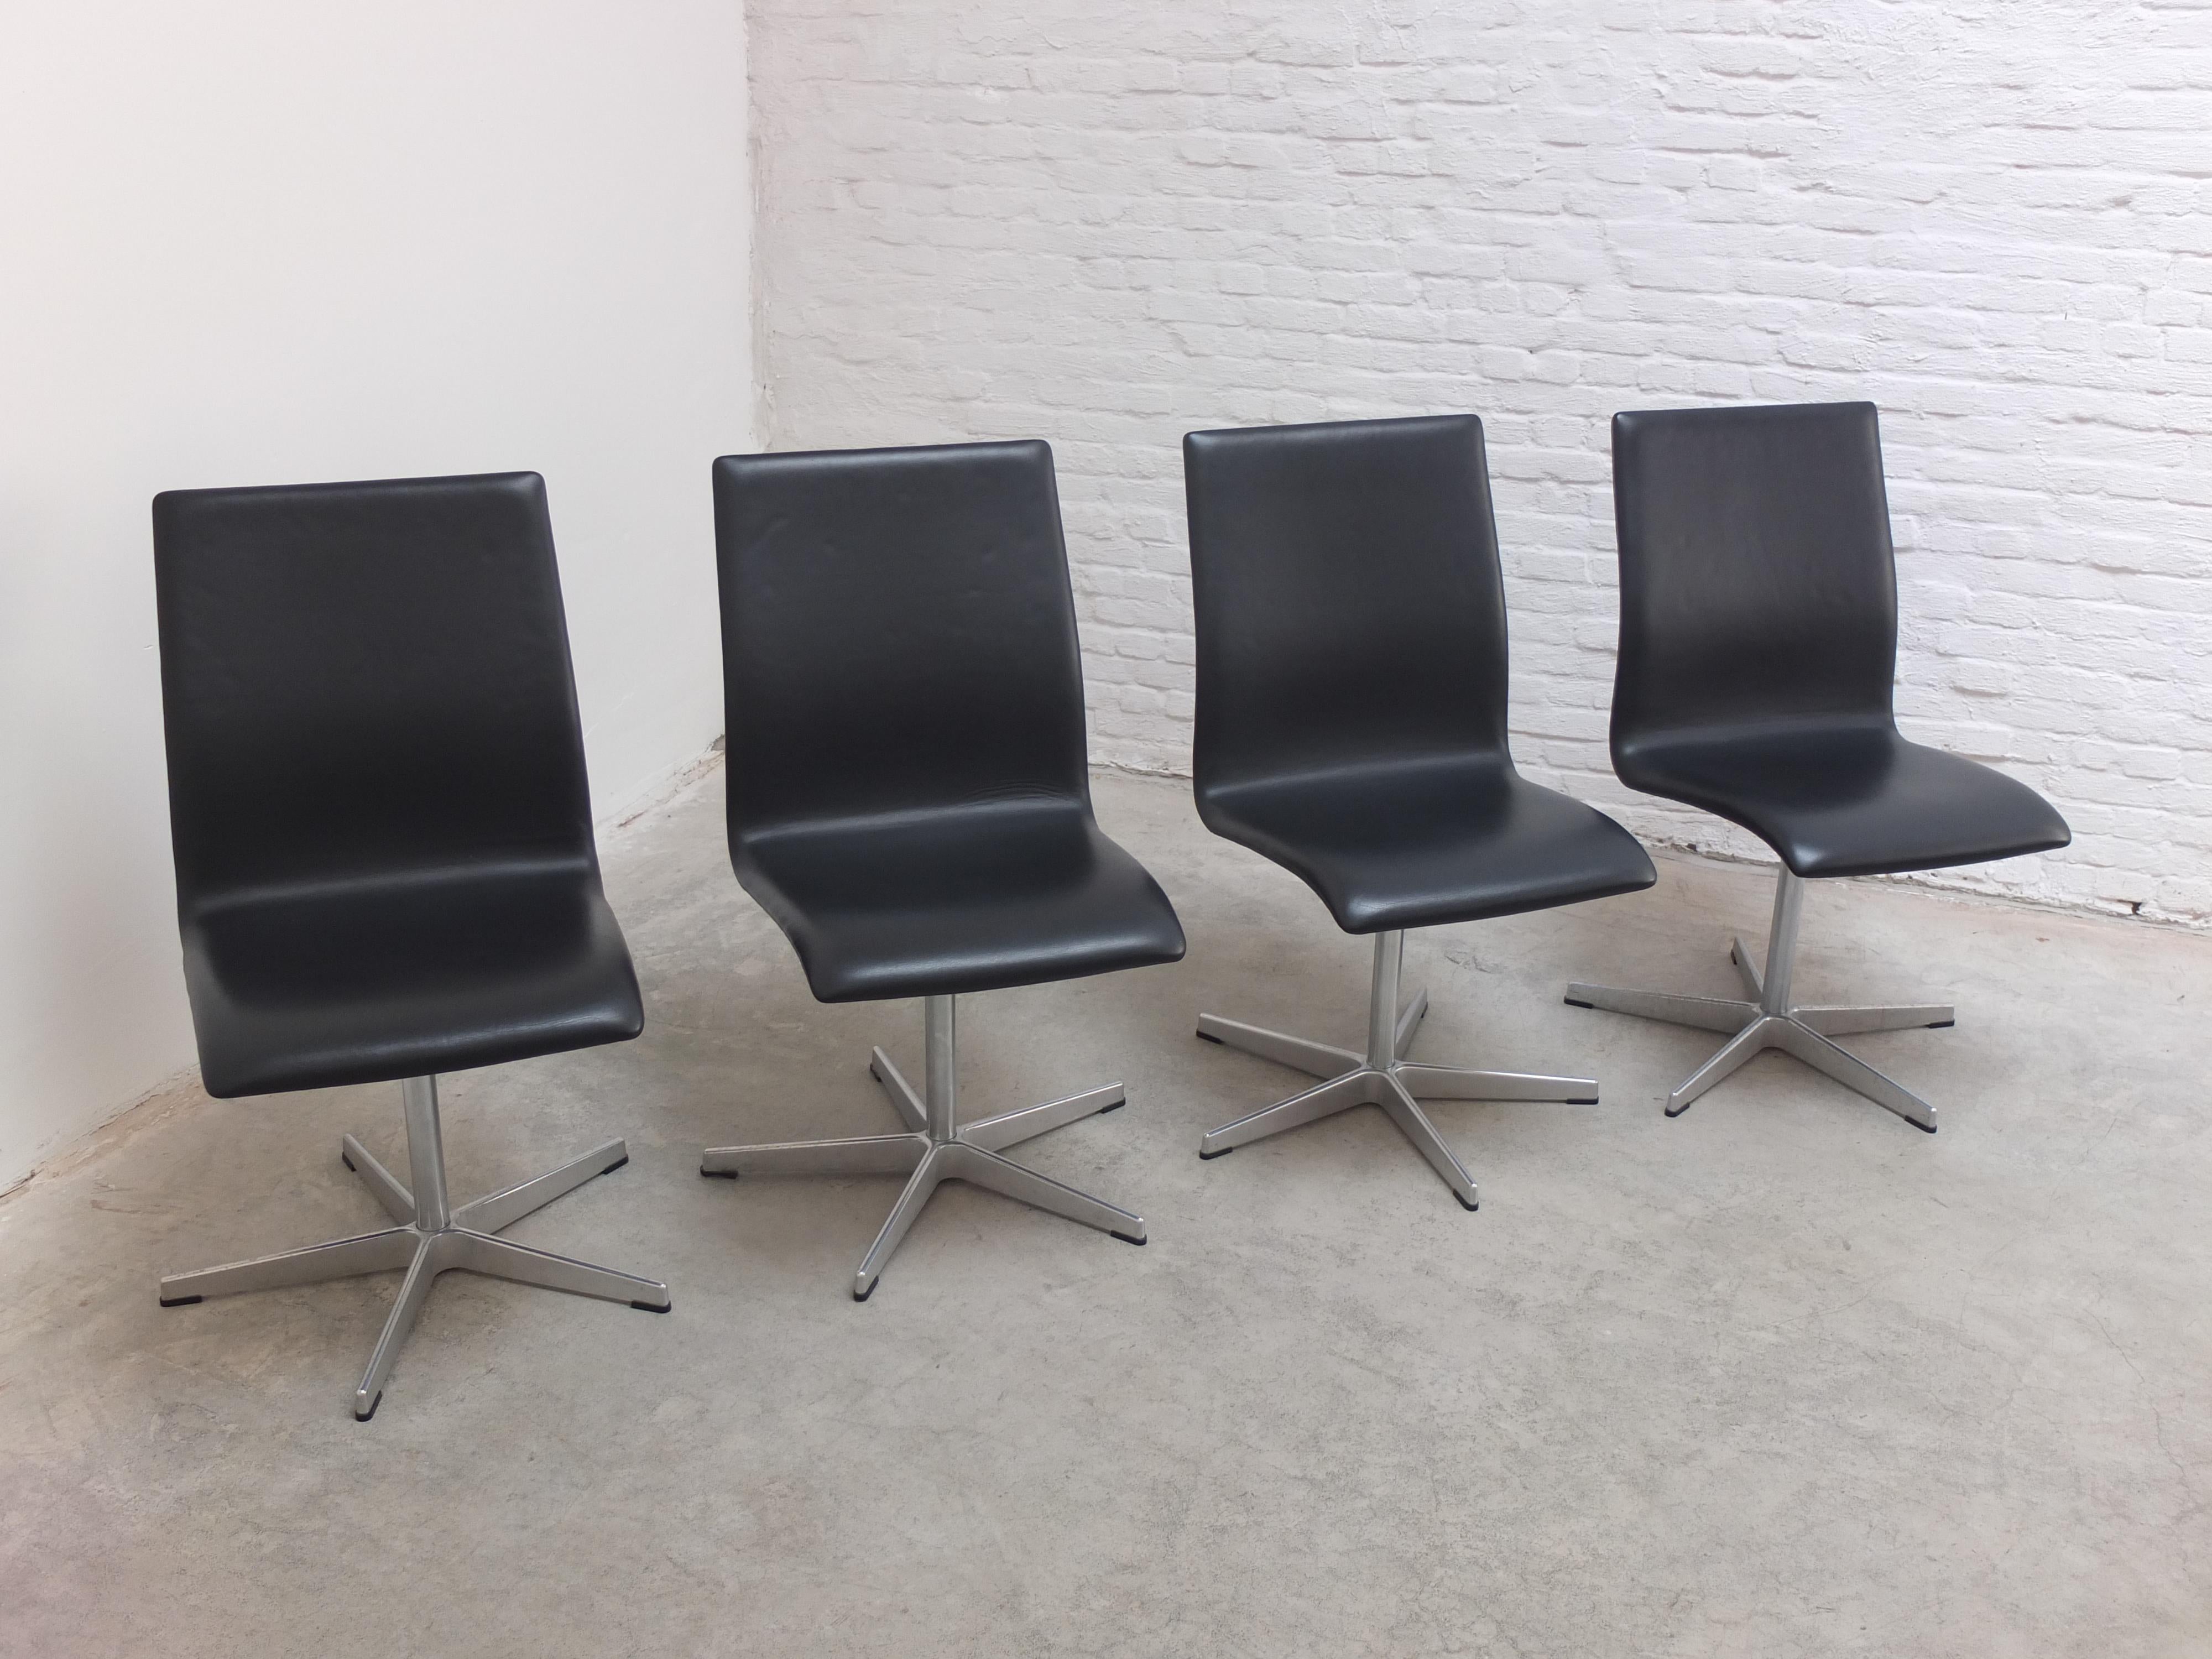 20th Century Set of 4 'Oxford' Swivel Chairs by Arne Jacobsen for Fritz Hansen, 1965 For Sale